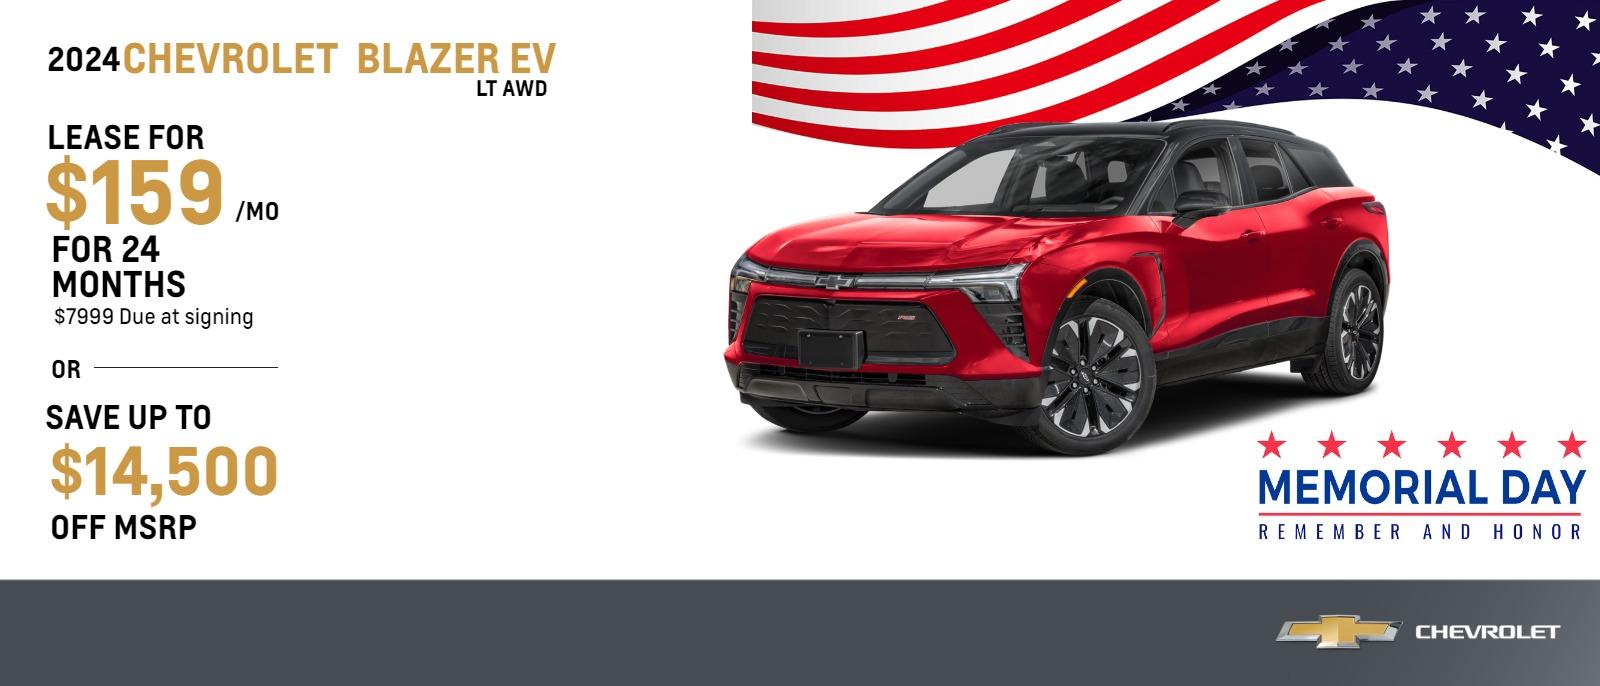 2024 Chevrolet Blazer EV LT AWD
$159 Month Lease | 24 Months | $7999 Due at signing
OFFER = Save up to $14,500 OFF MSRP